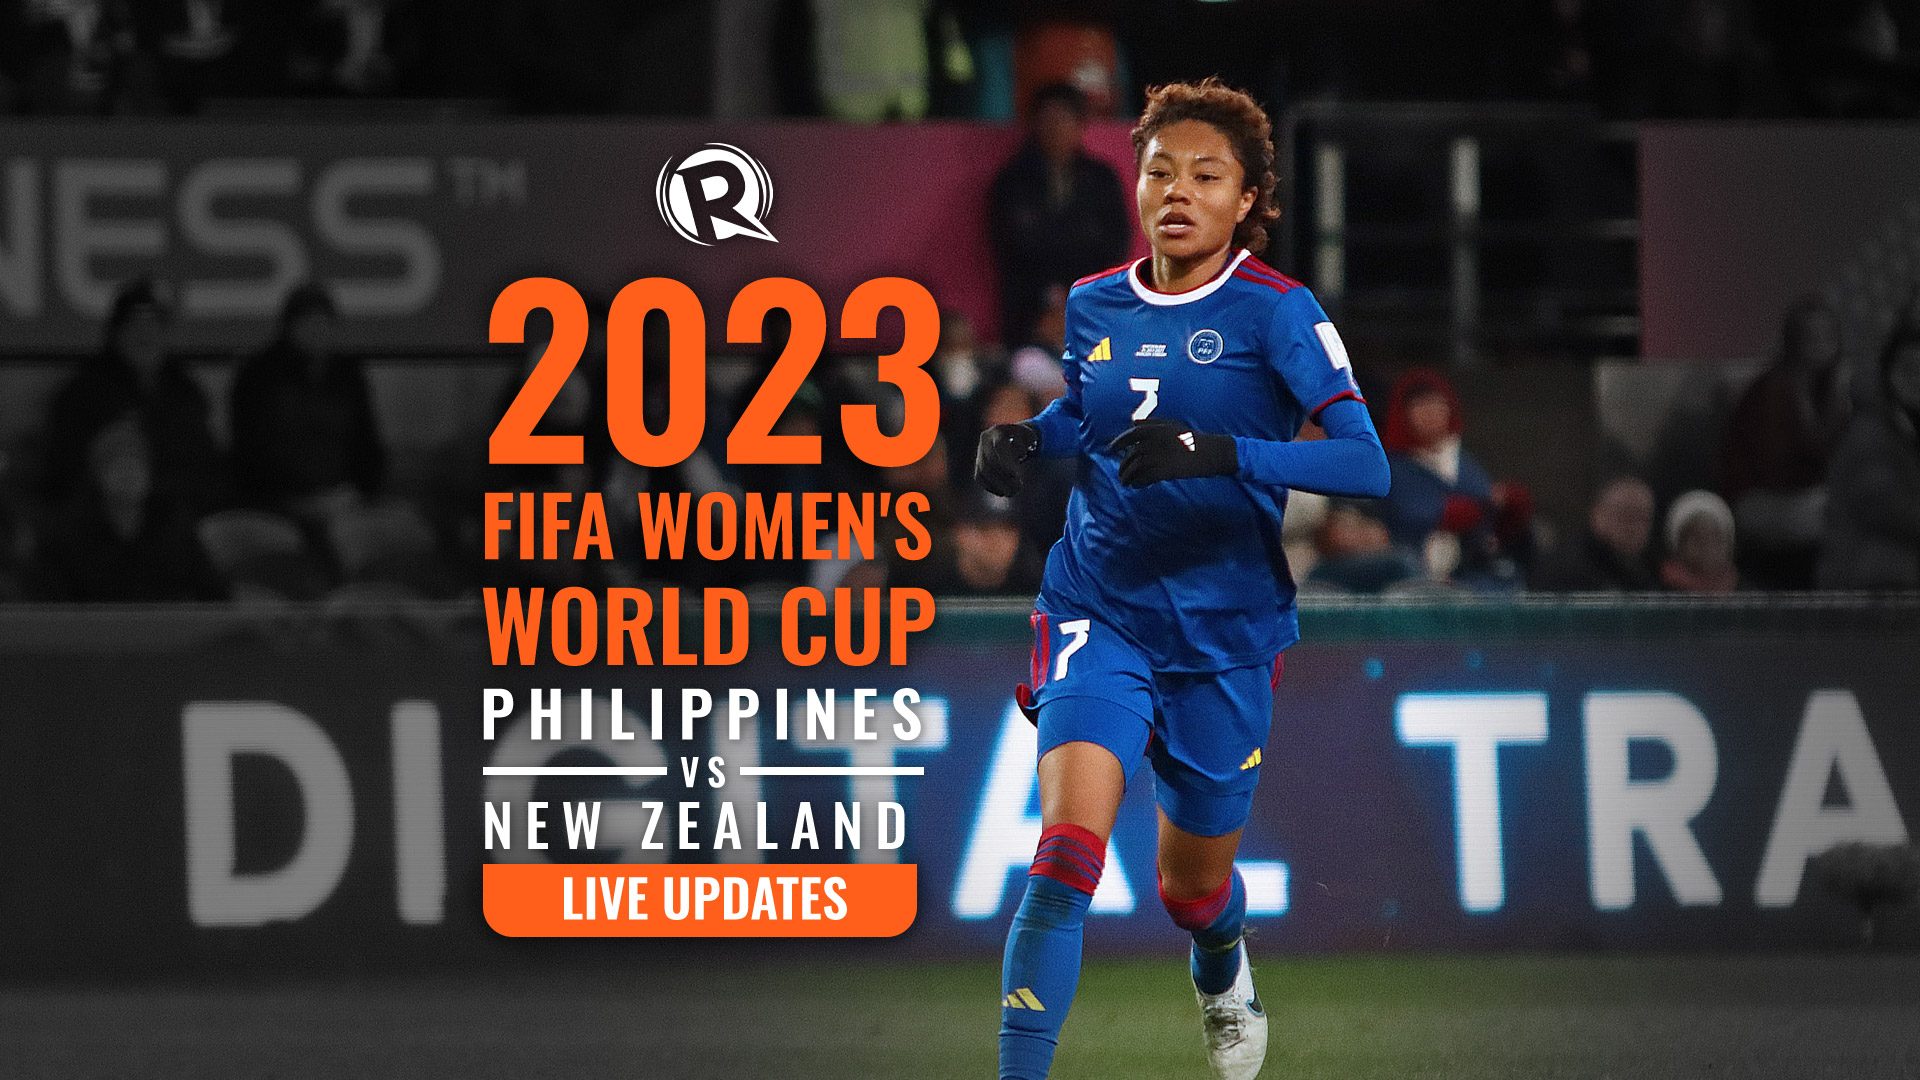 HIGHLIGHTS: Philippines vs New Zealand – FIFA Women’s World Cup 2023 